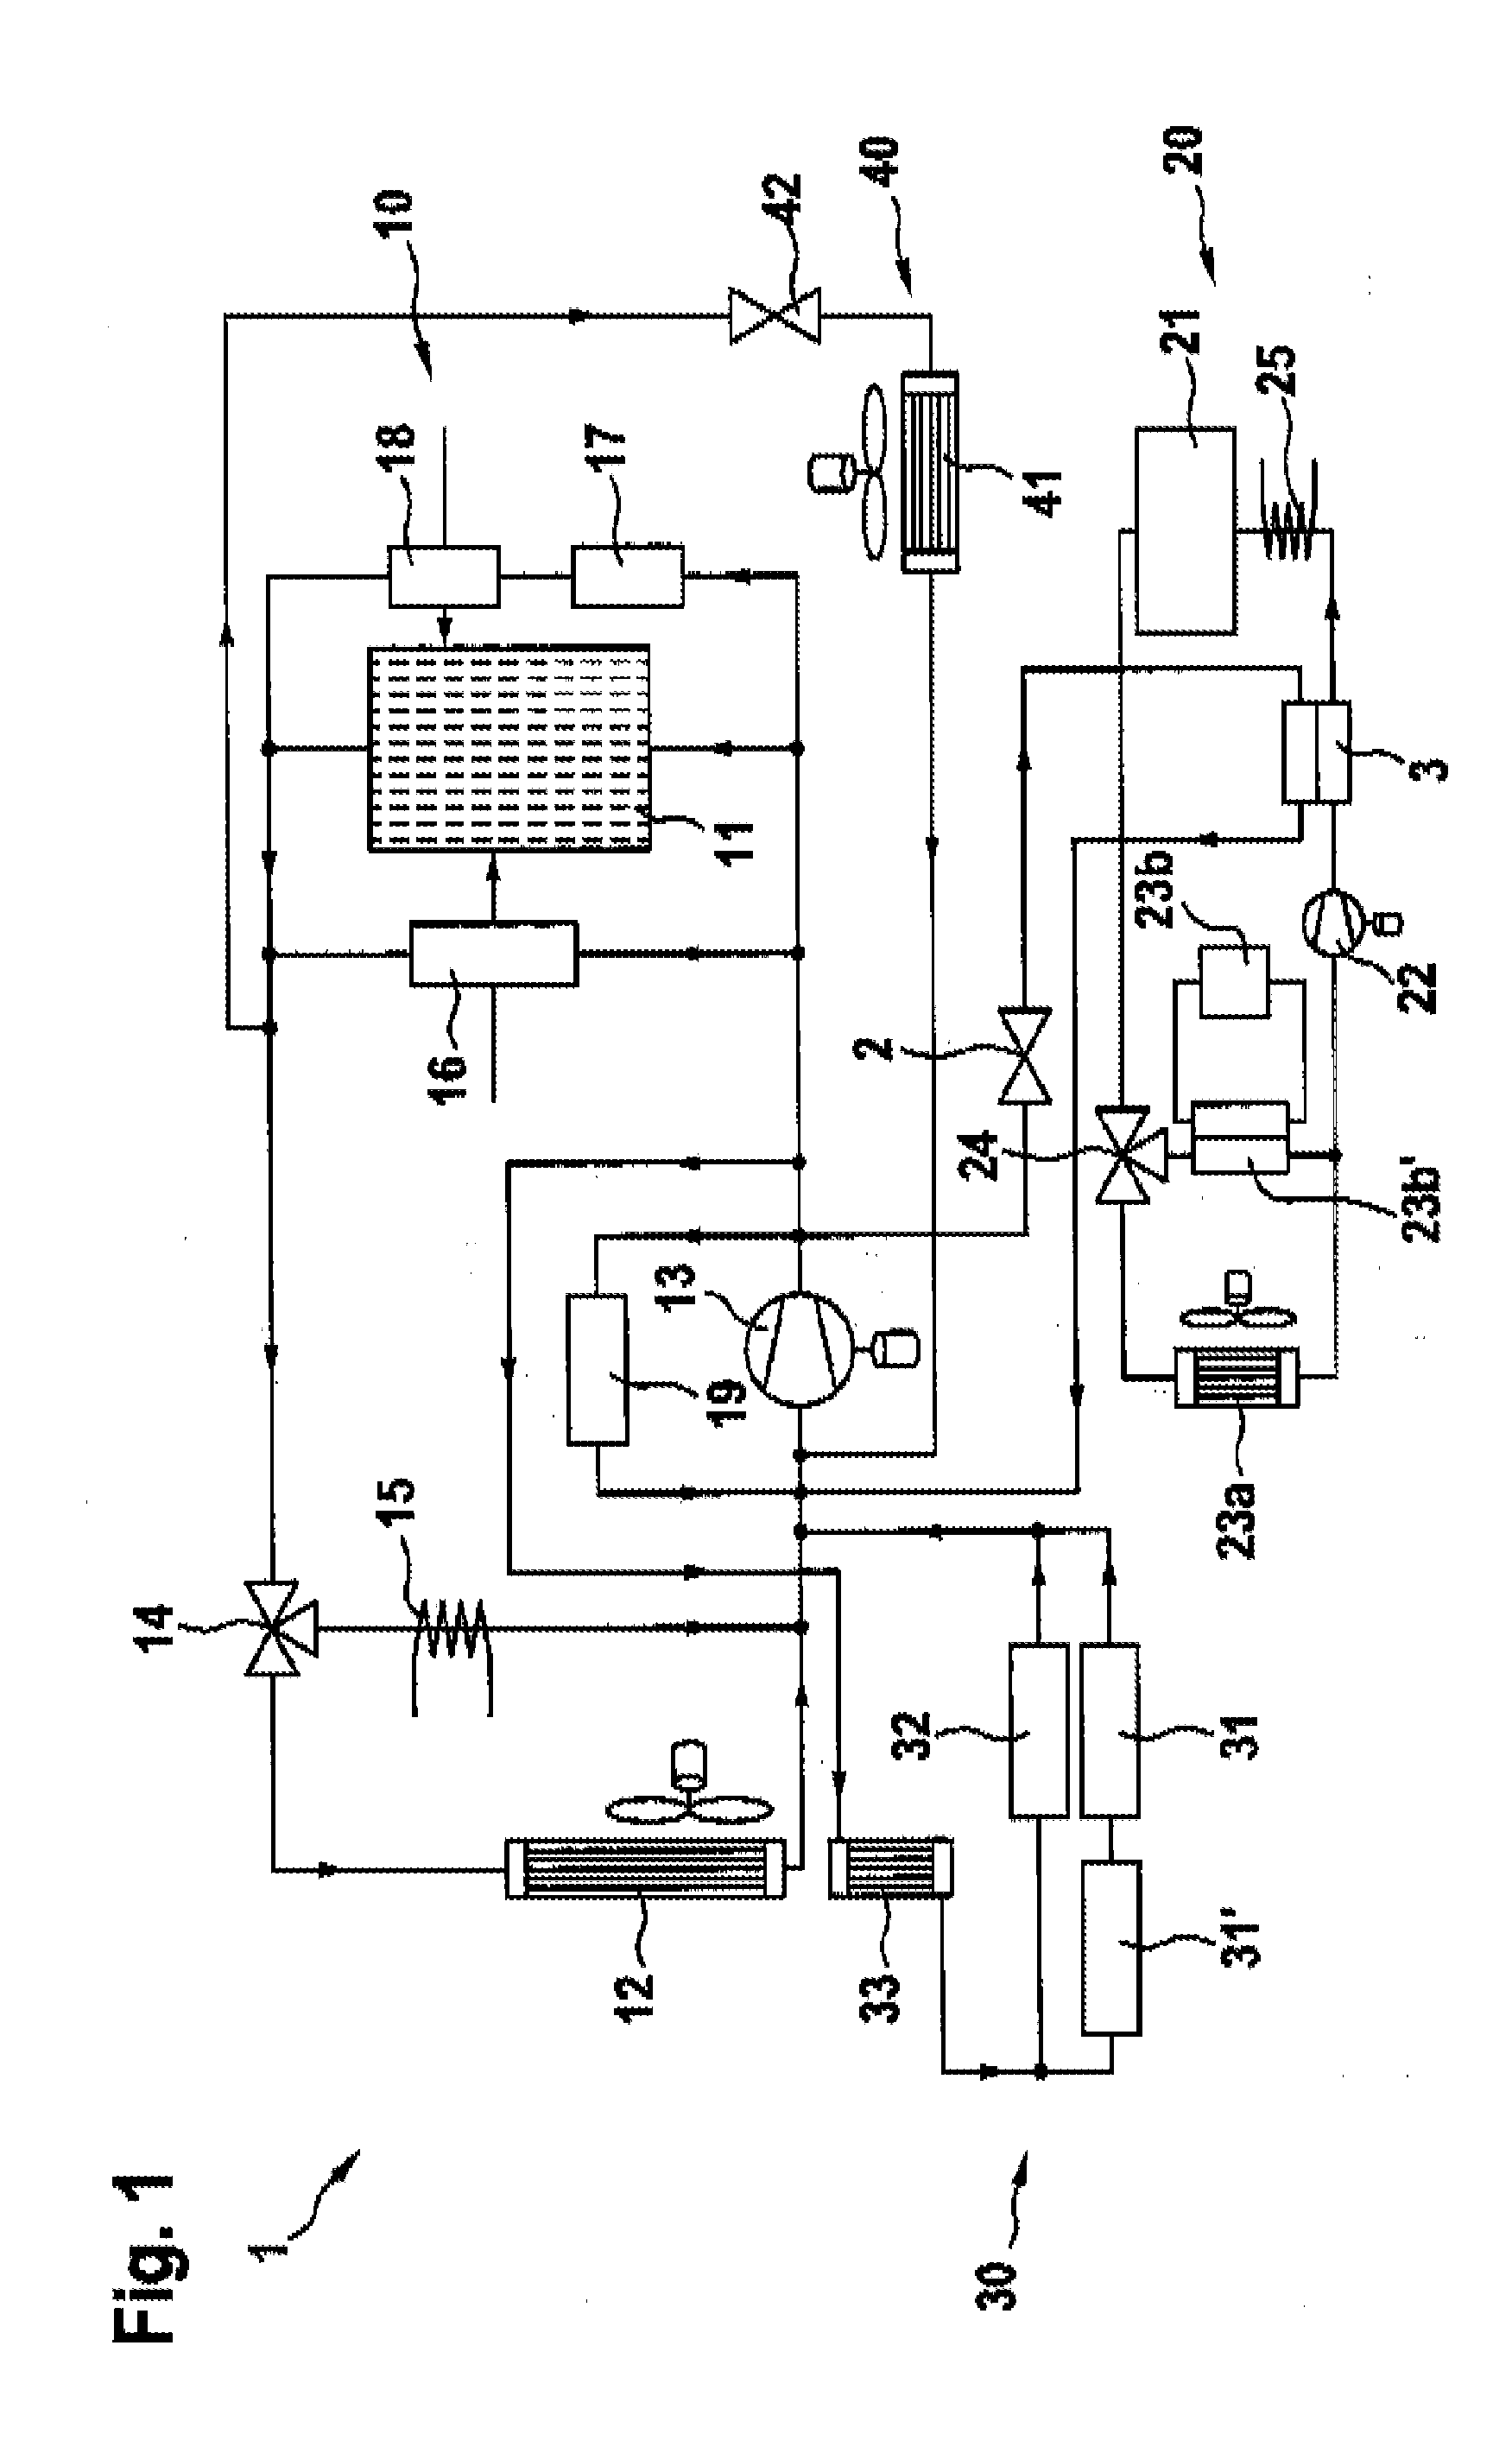 Fuel cell cooling system with coupling out of heat